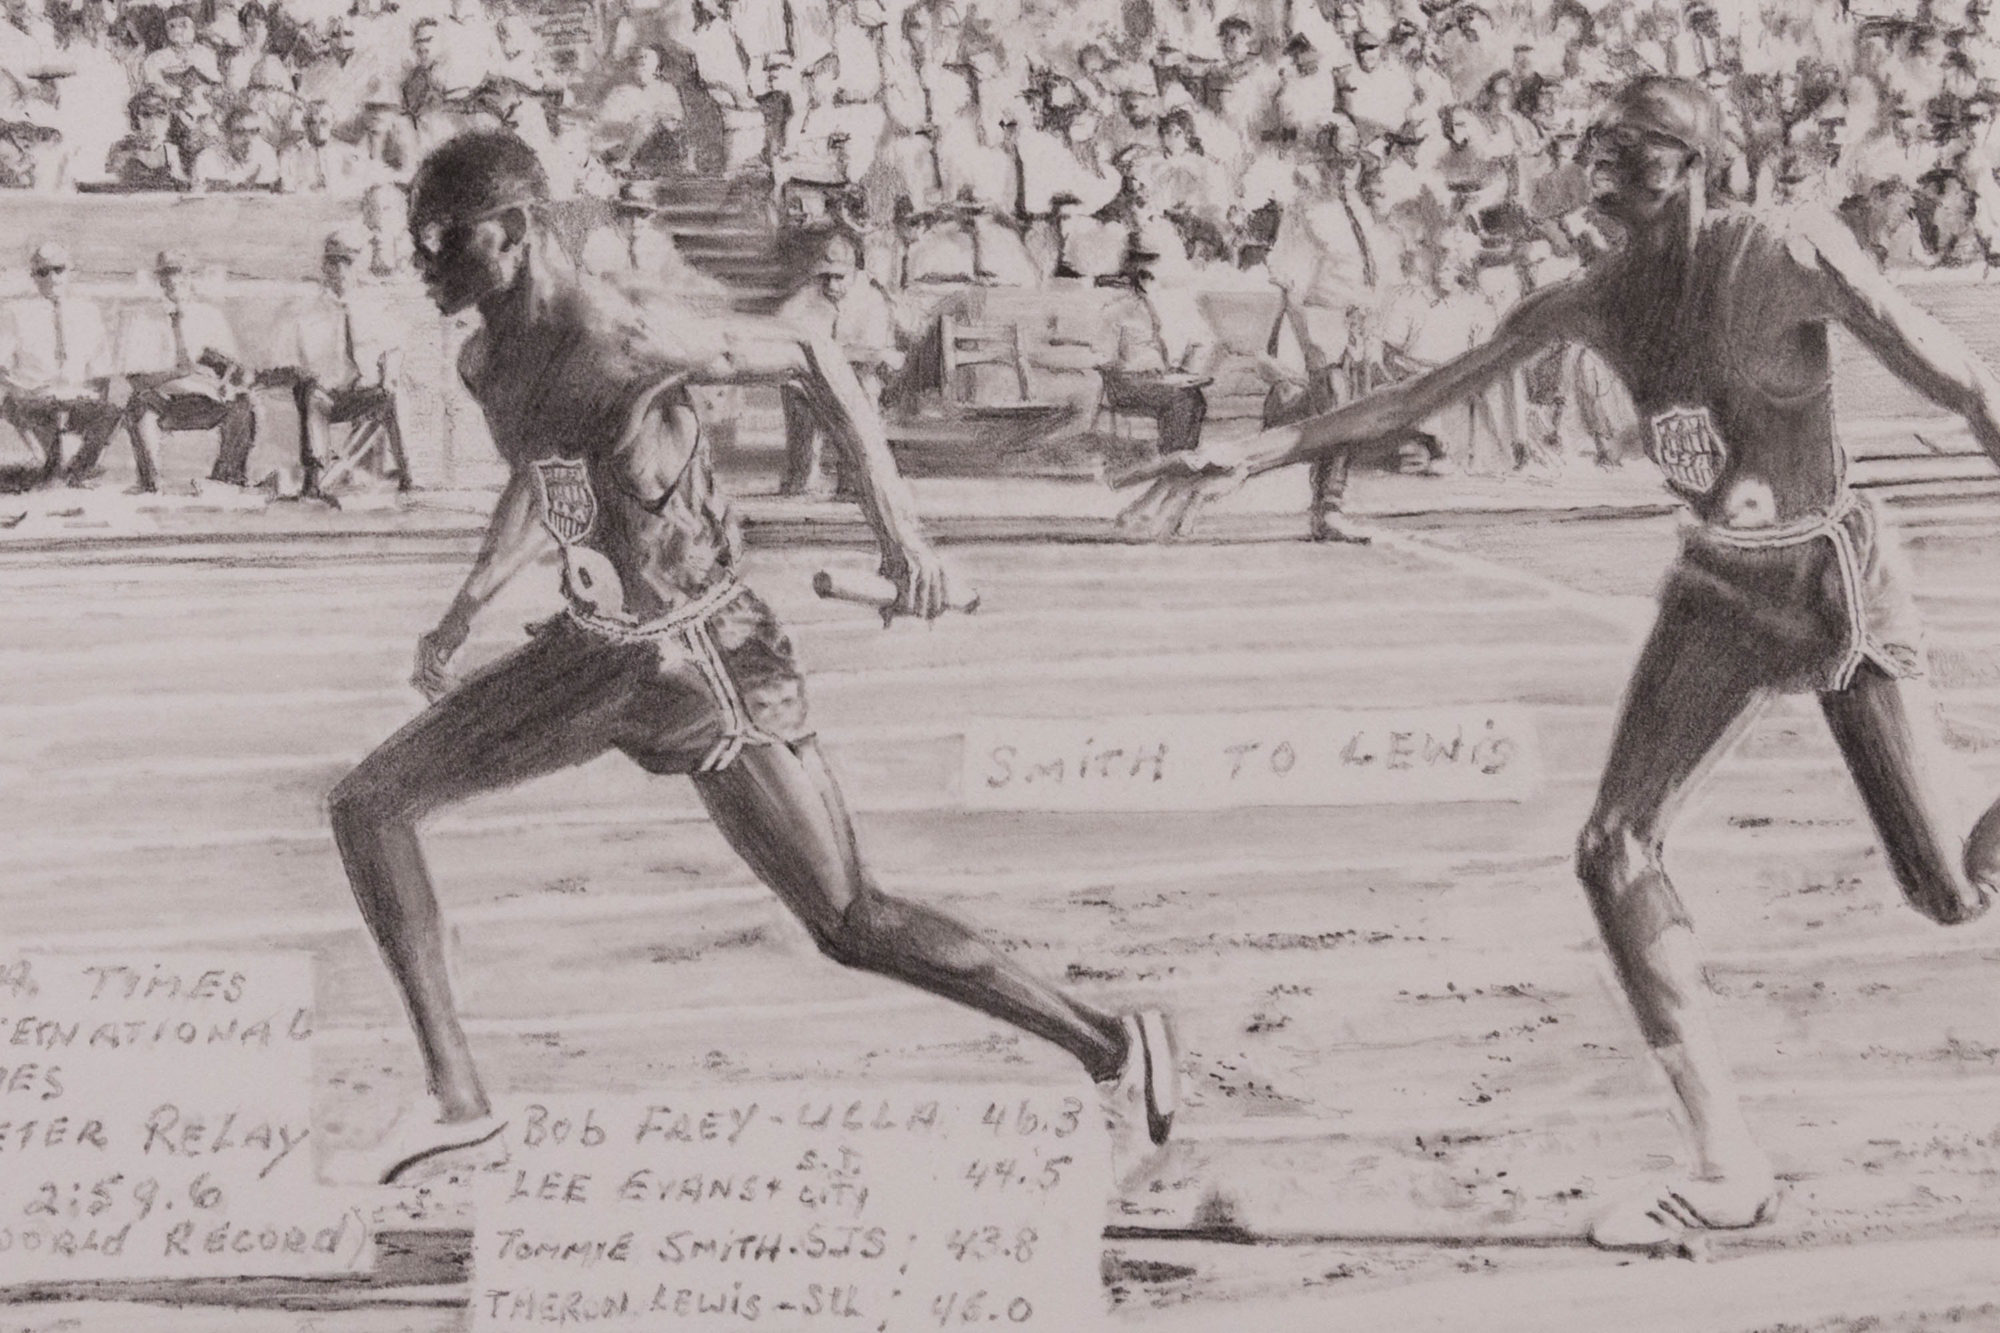 grayscale image of track runners passing the baton